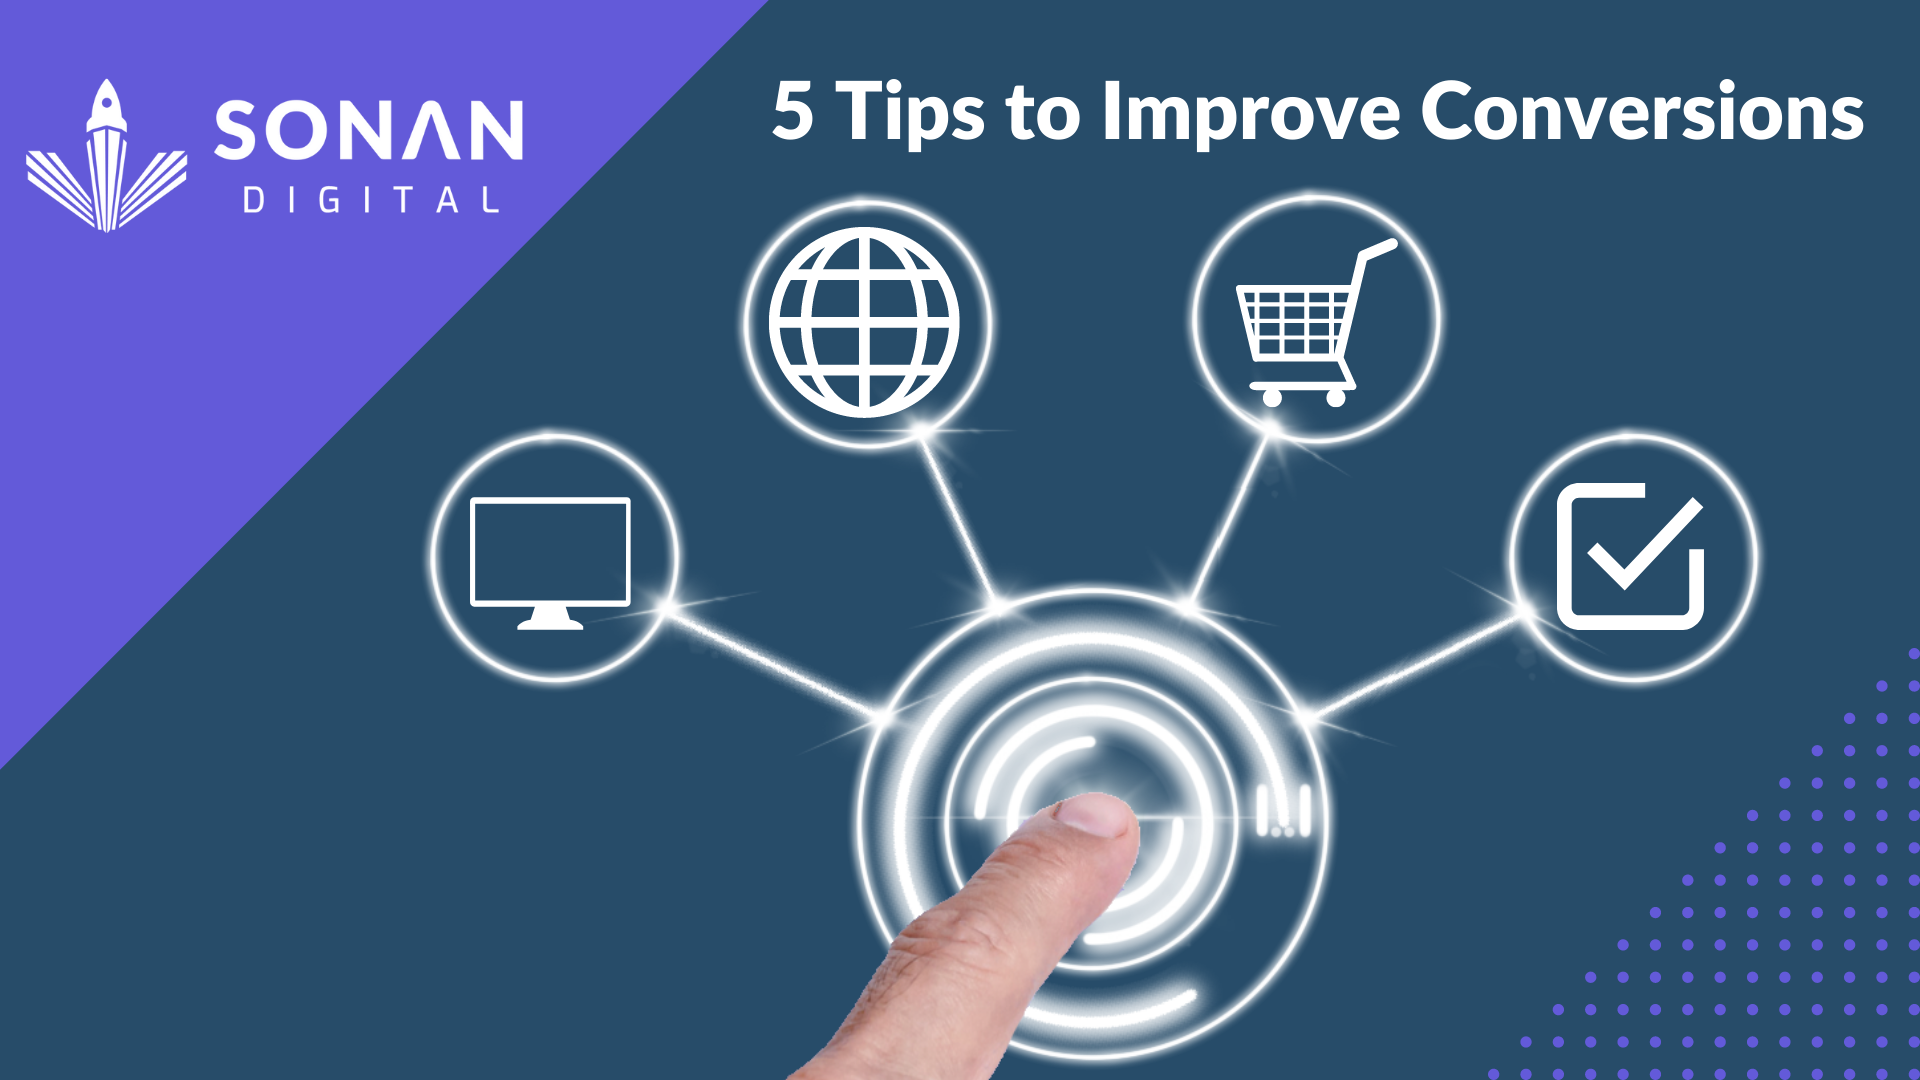 B2B Website Best Practices: [5 Tips to Improve Conversions]